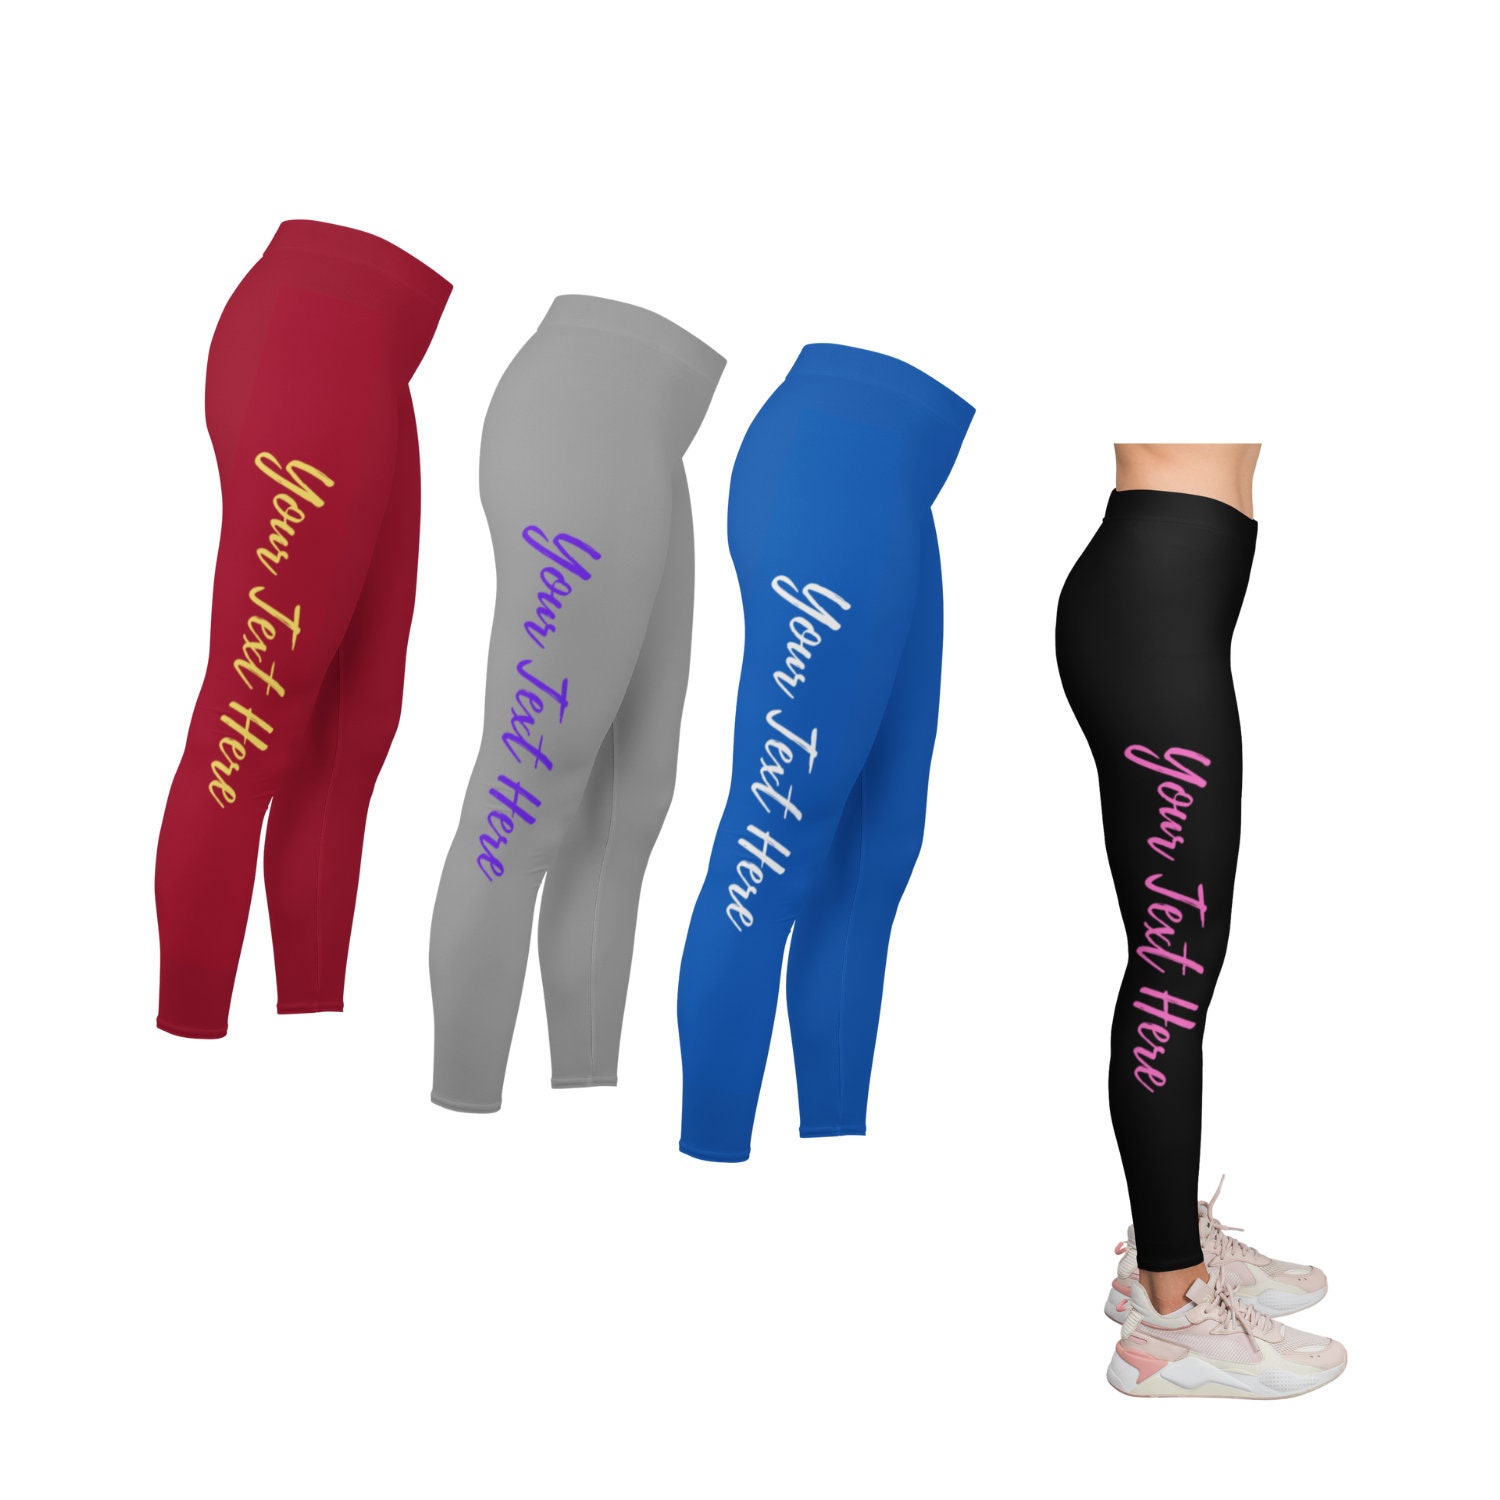 Your Own Quote Tights, High Waisted Leggings